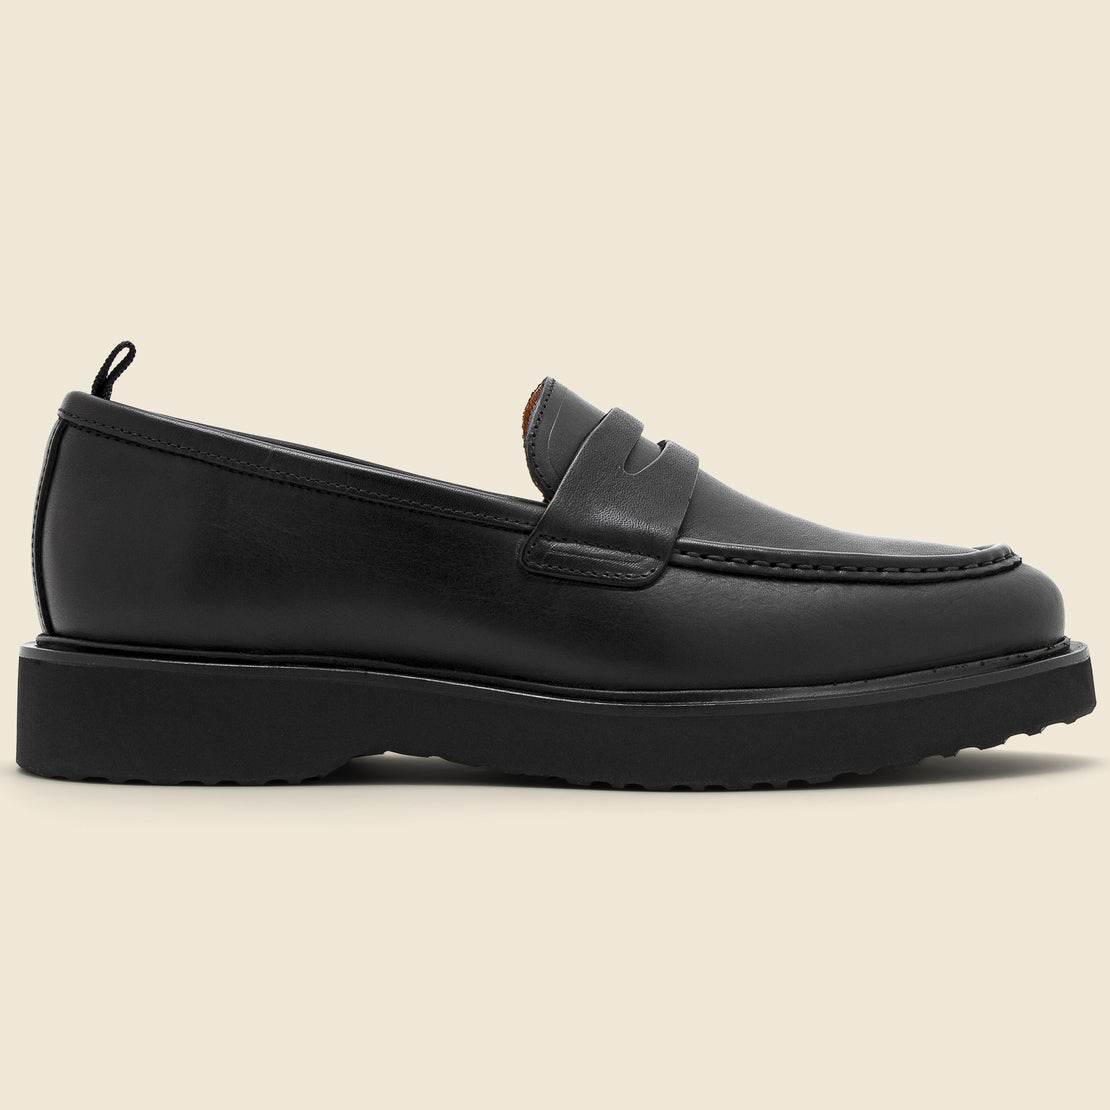 Shoe the Bear Cosmos Leather Loafer - Black